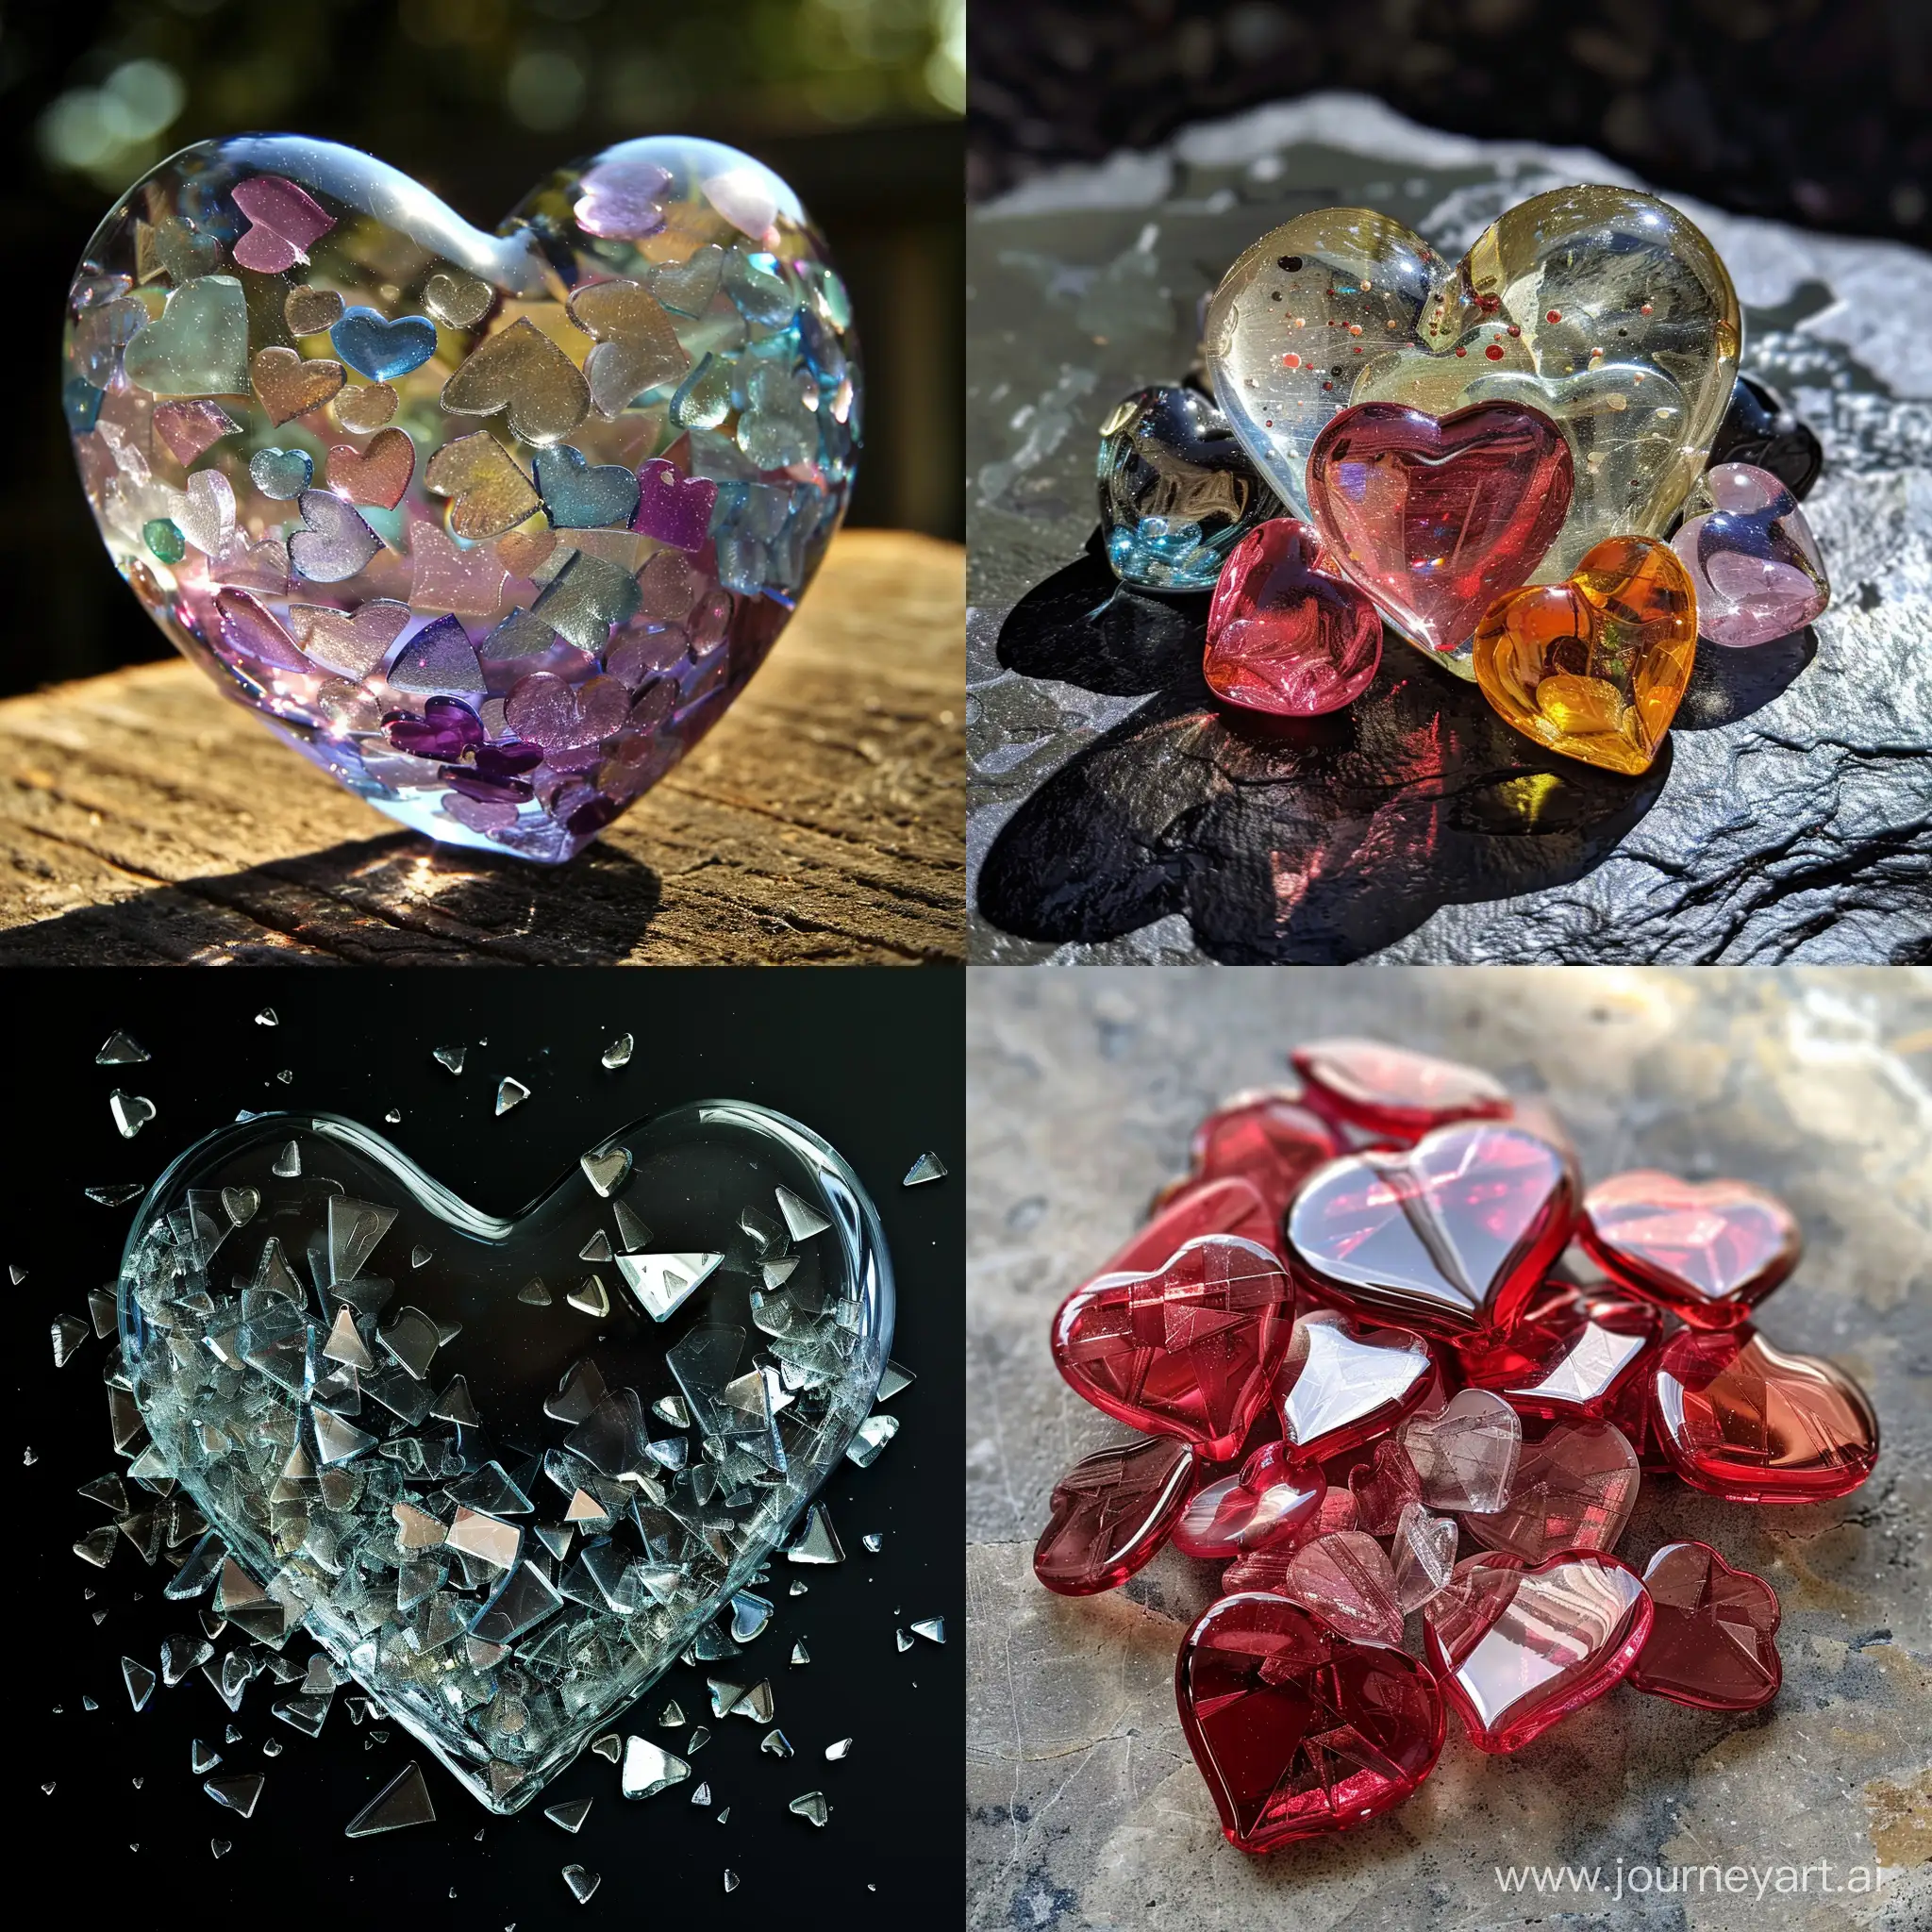 Shattered-Glass-Heart-Artwork-Vivid-and-Abstract-Heartbreak-Imagery